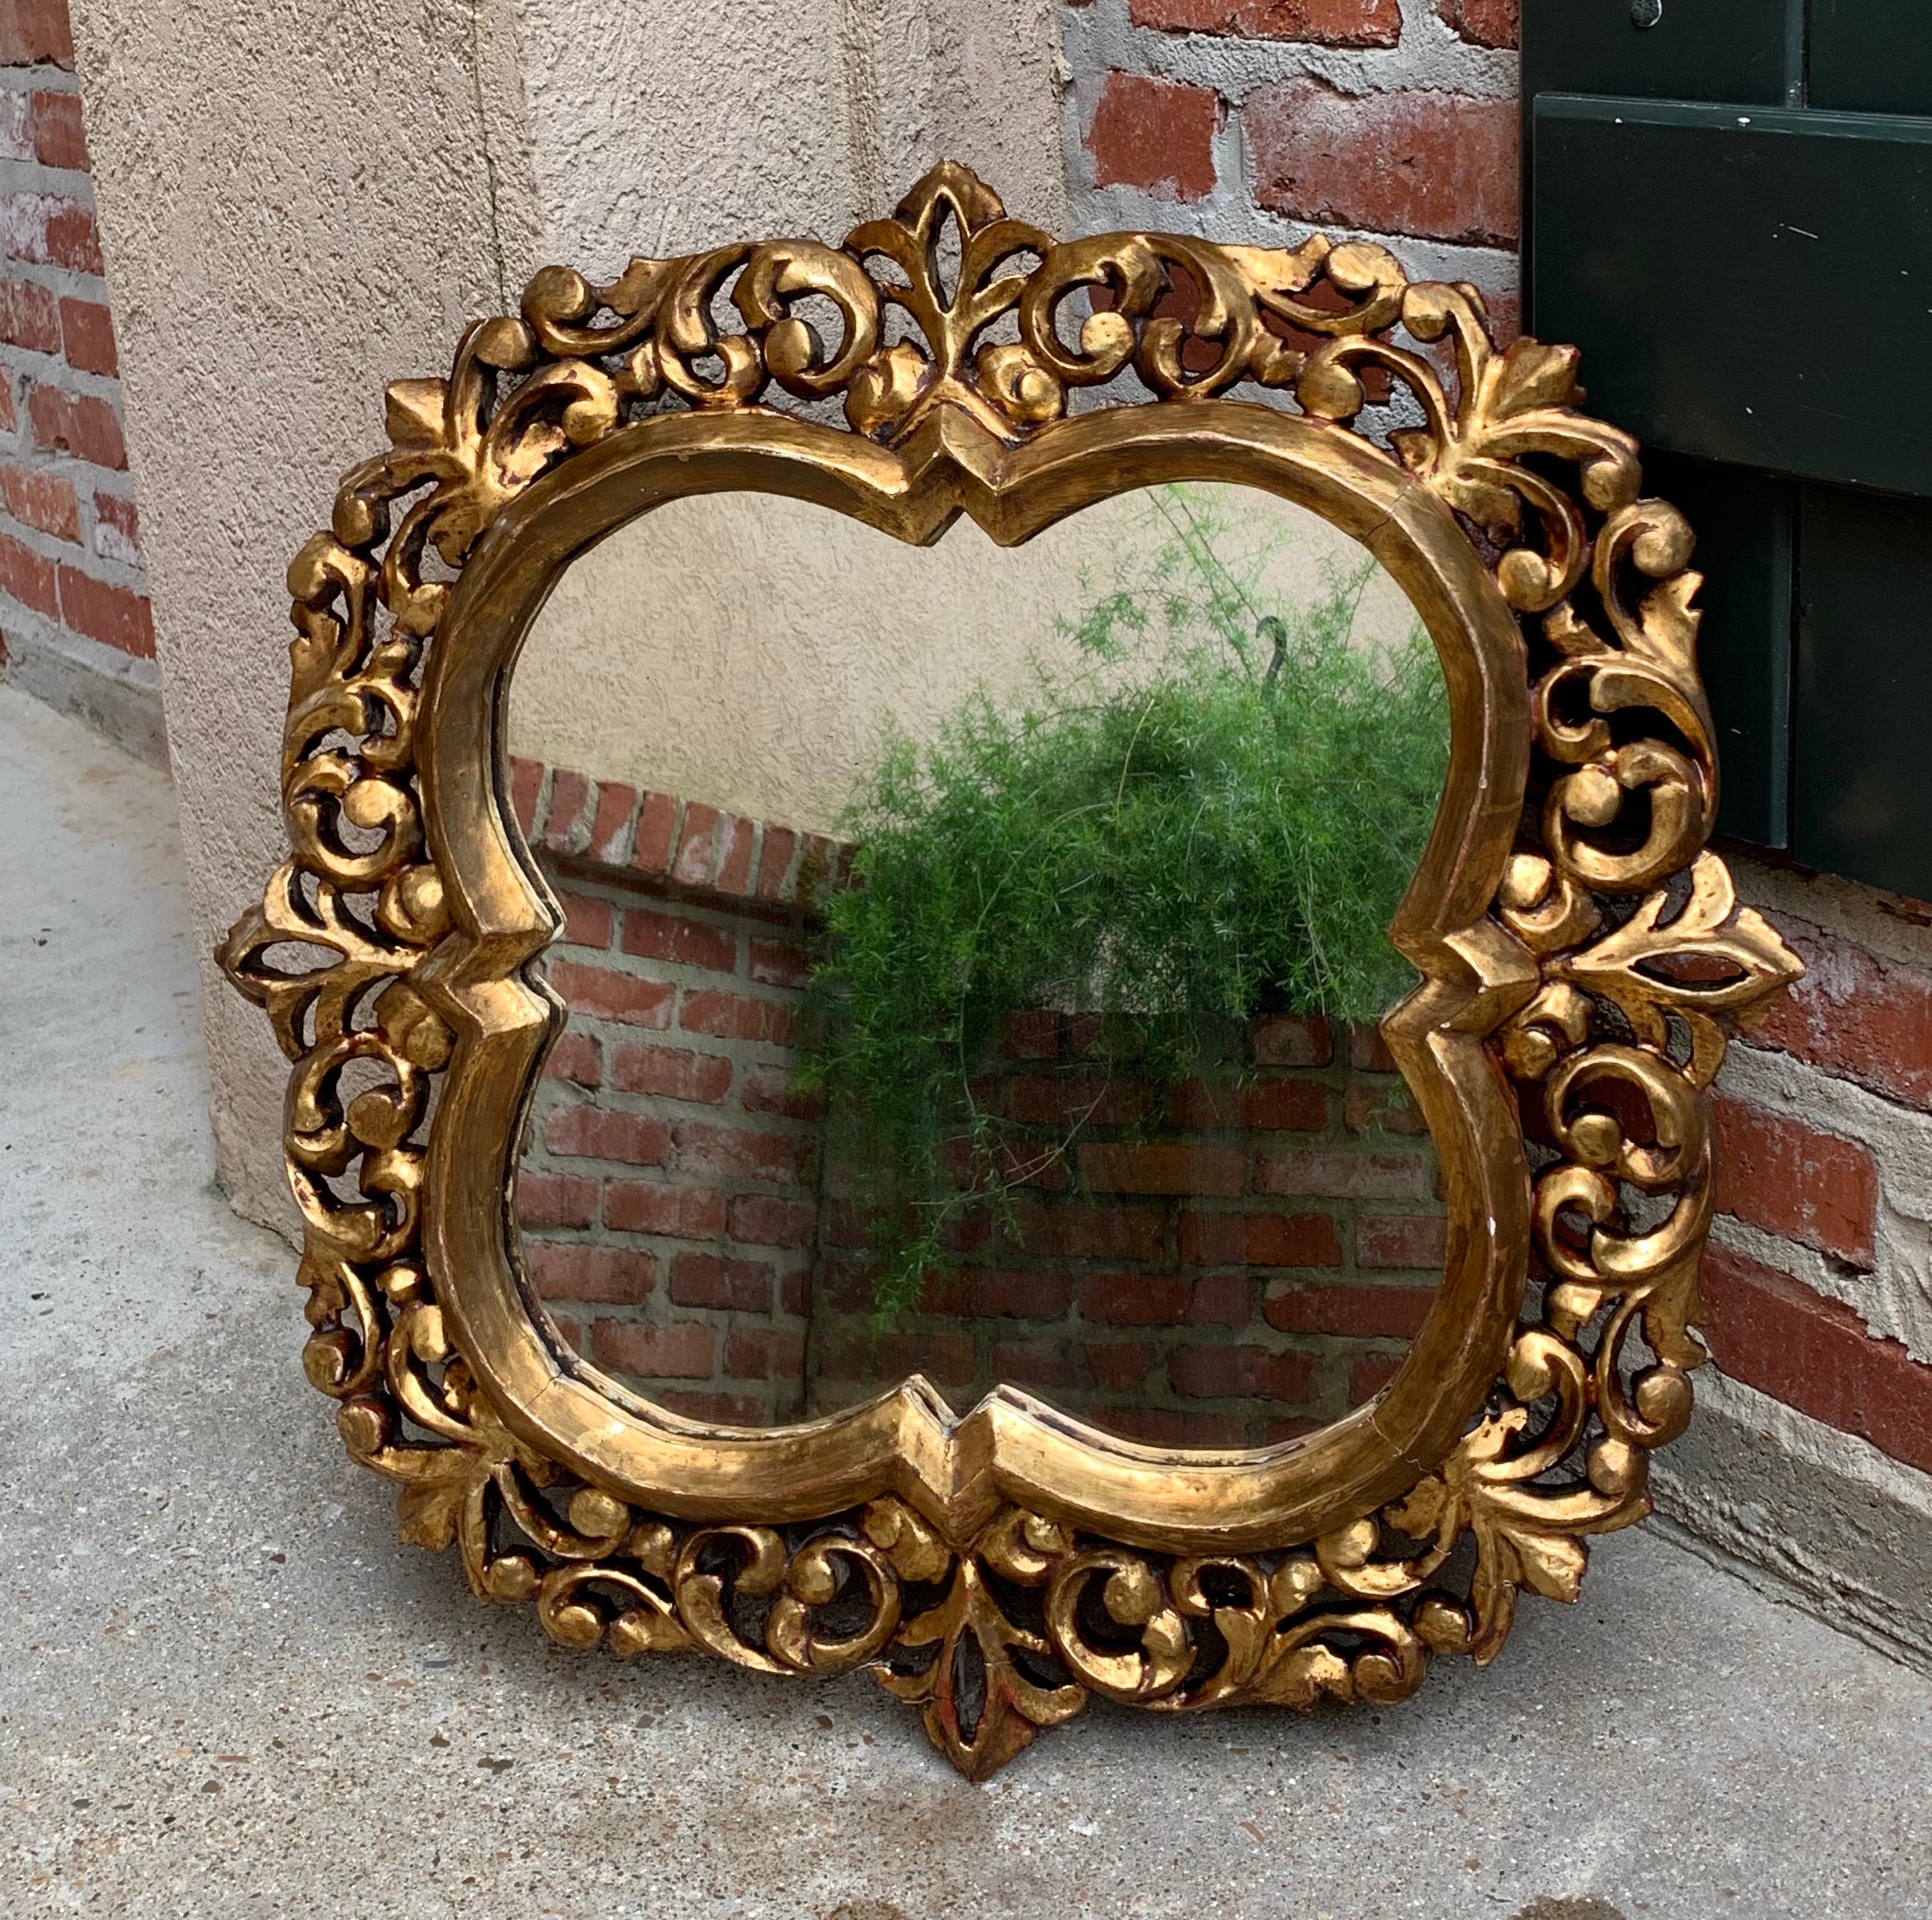 ~Direct from Italy~
~Beautifully shaped antique Italian wall mirror, gold gilt gesso frame with gorgeous details!~
~This is one mirror; there is a matching mirror available~
~circa 1920~

Measurements:
24.5